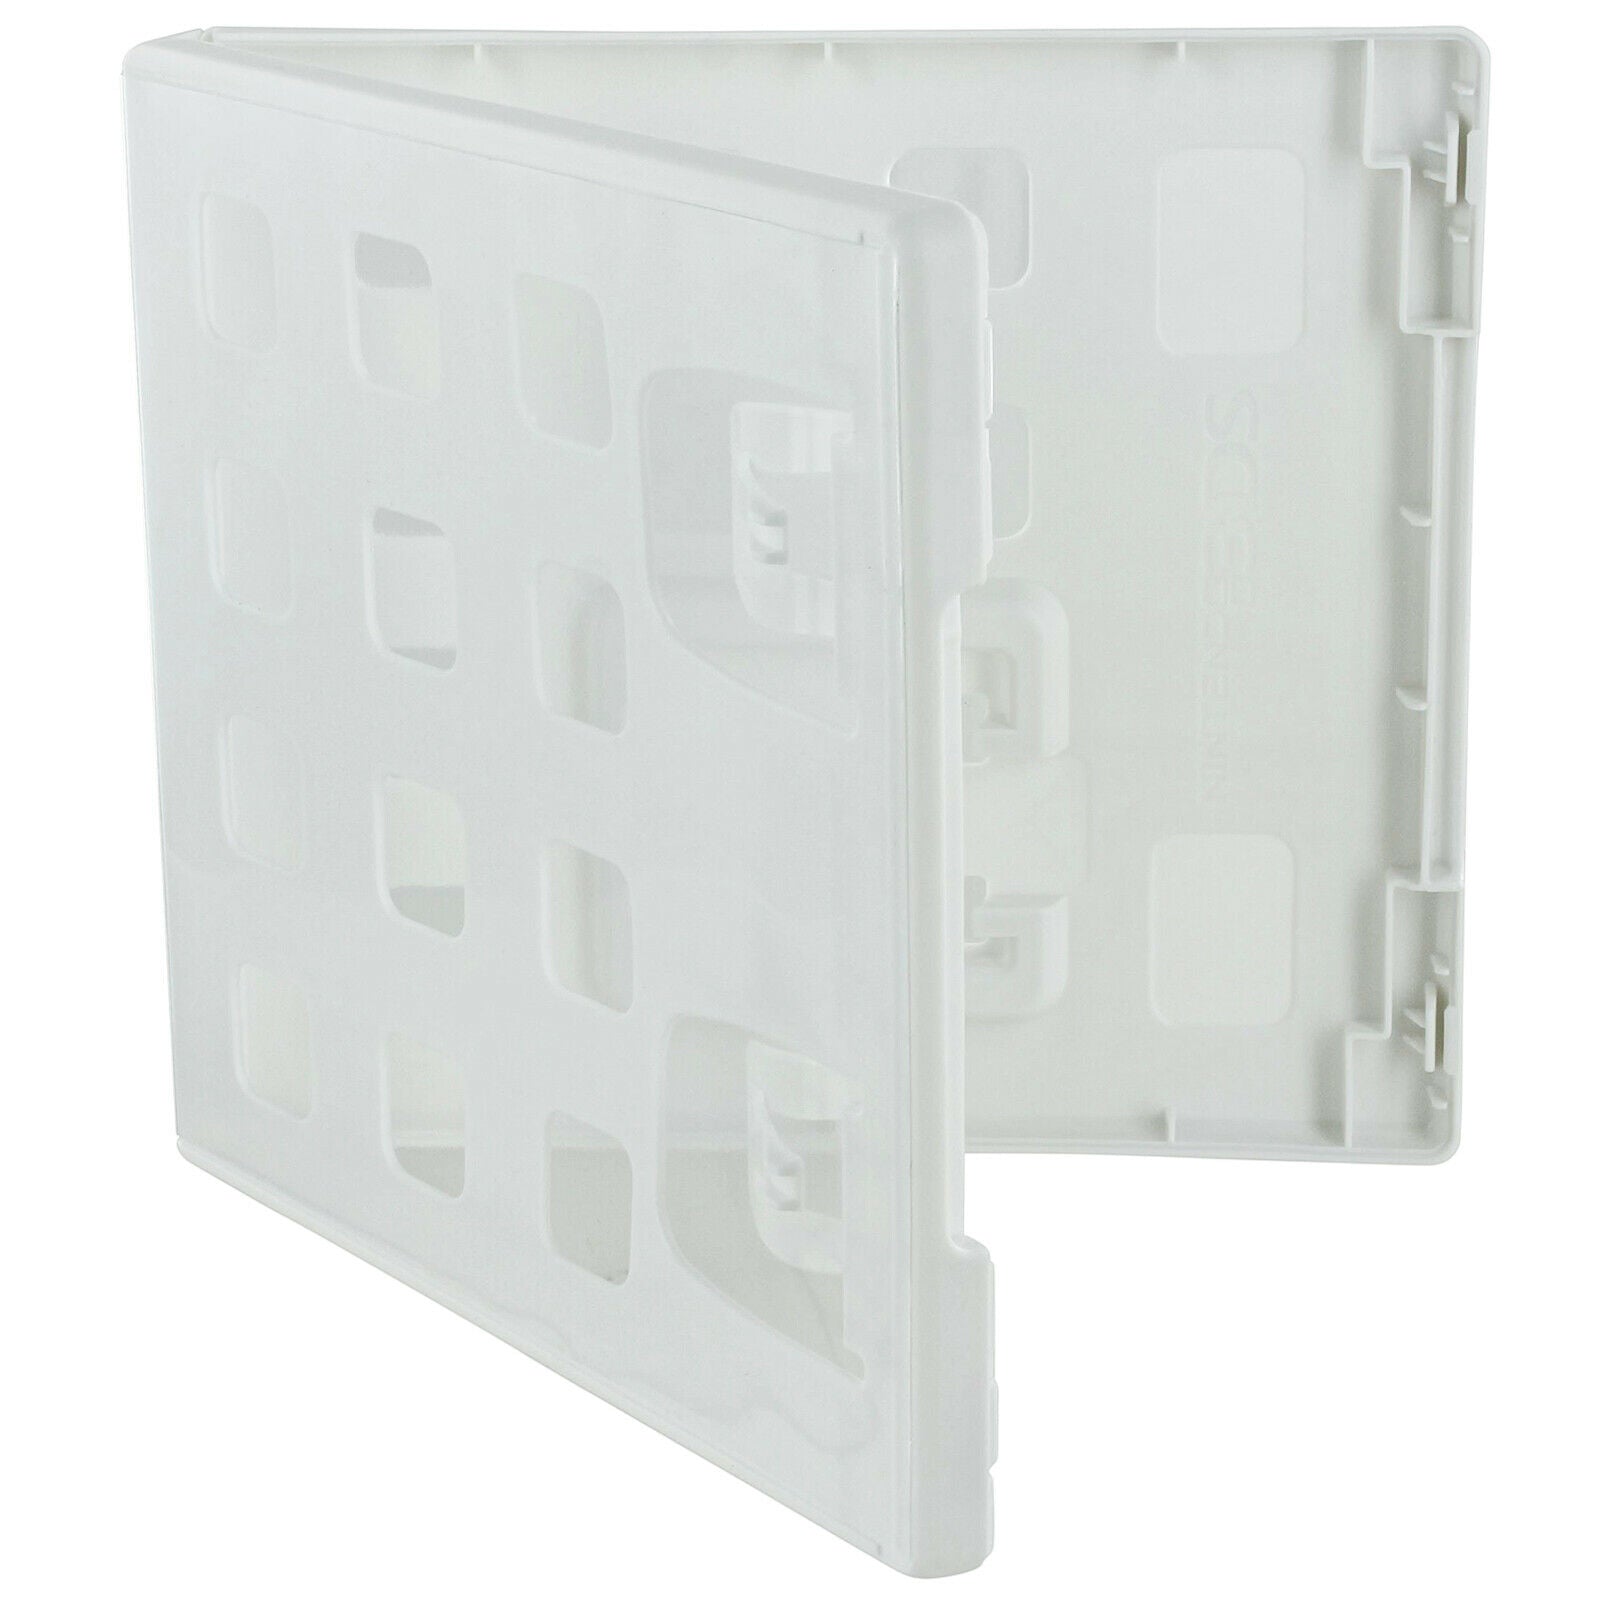 Game case for Nintendo 3DS empty replacement retail holder box 25 pack | ZedLabz